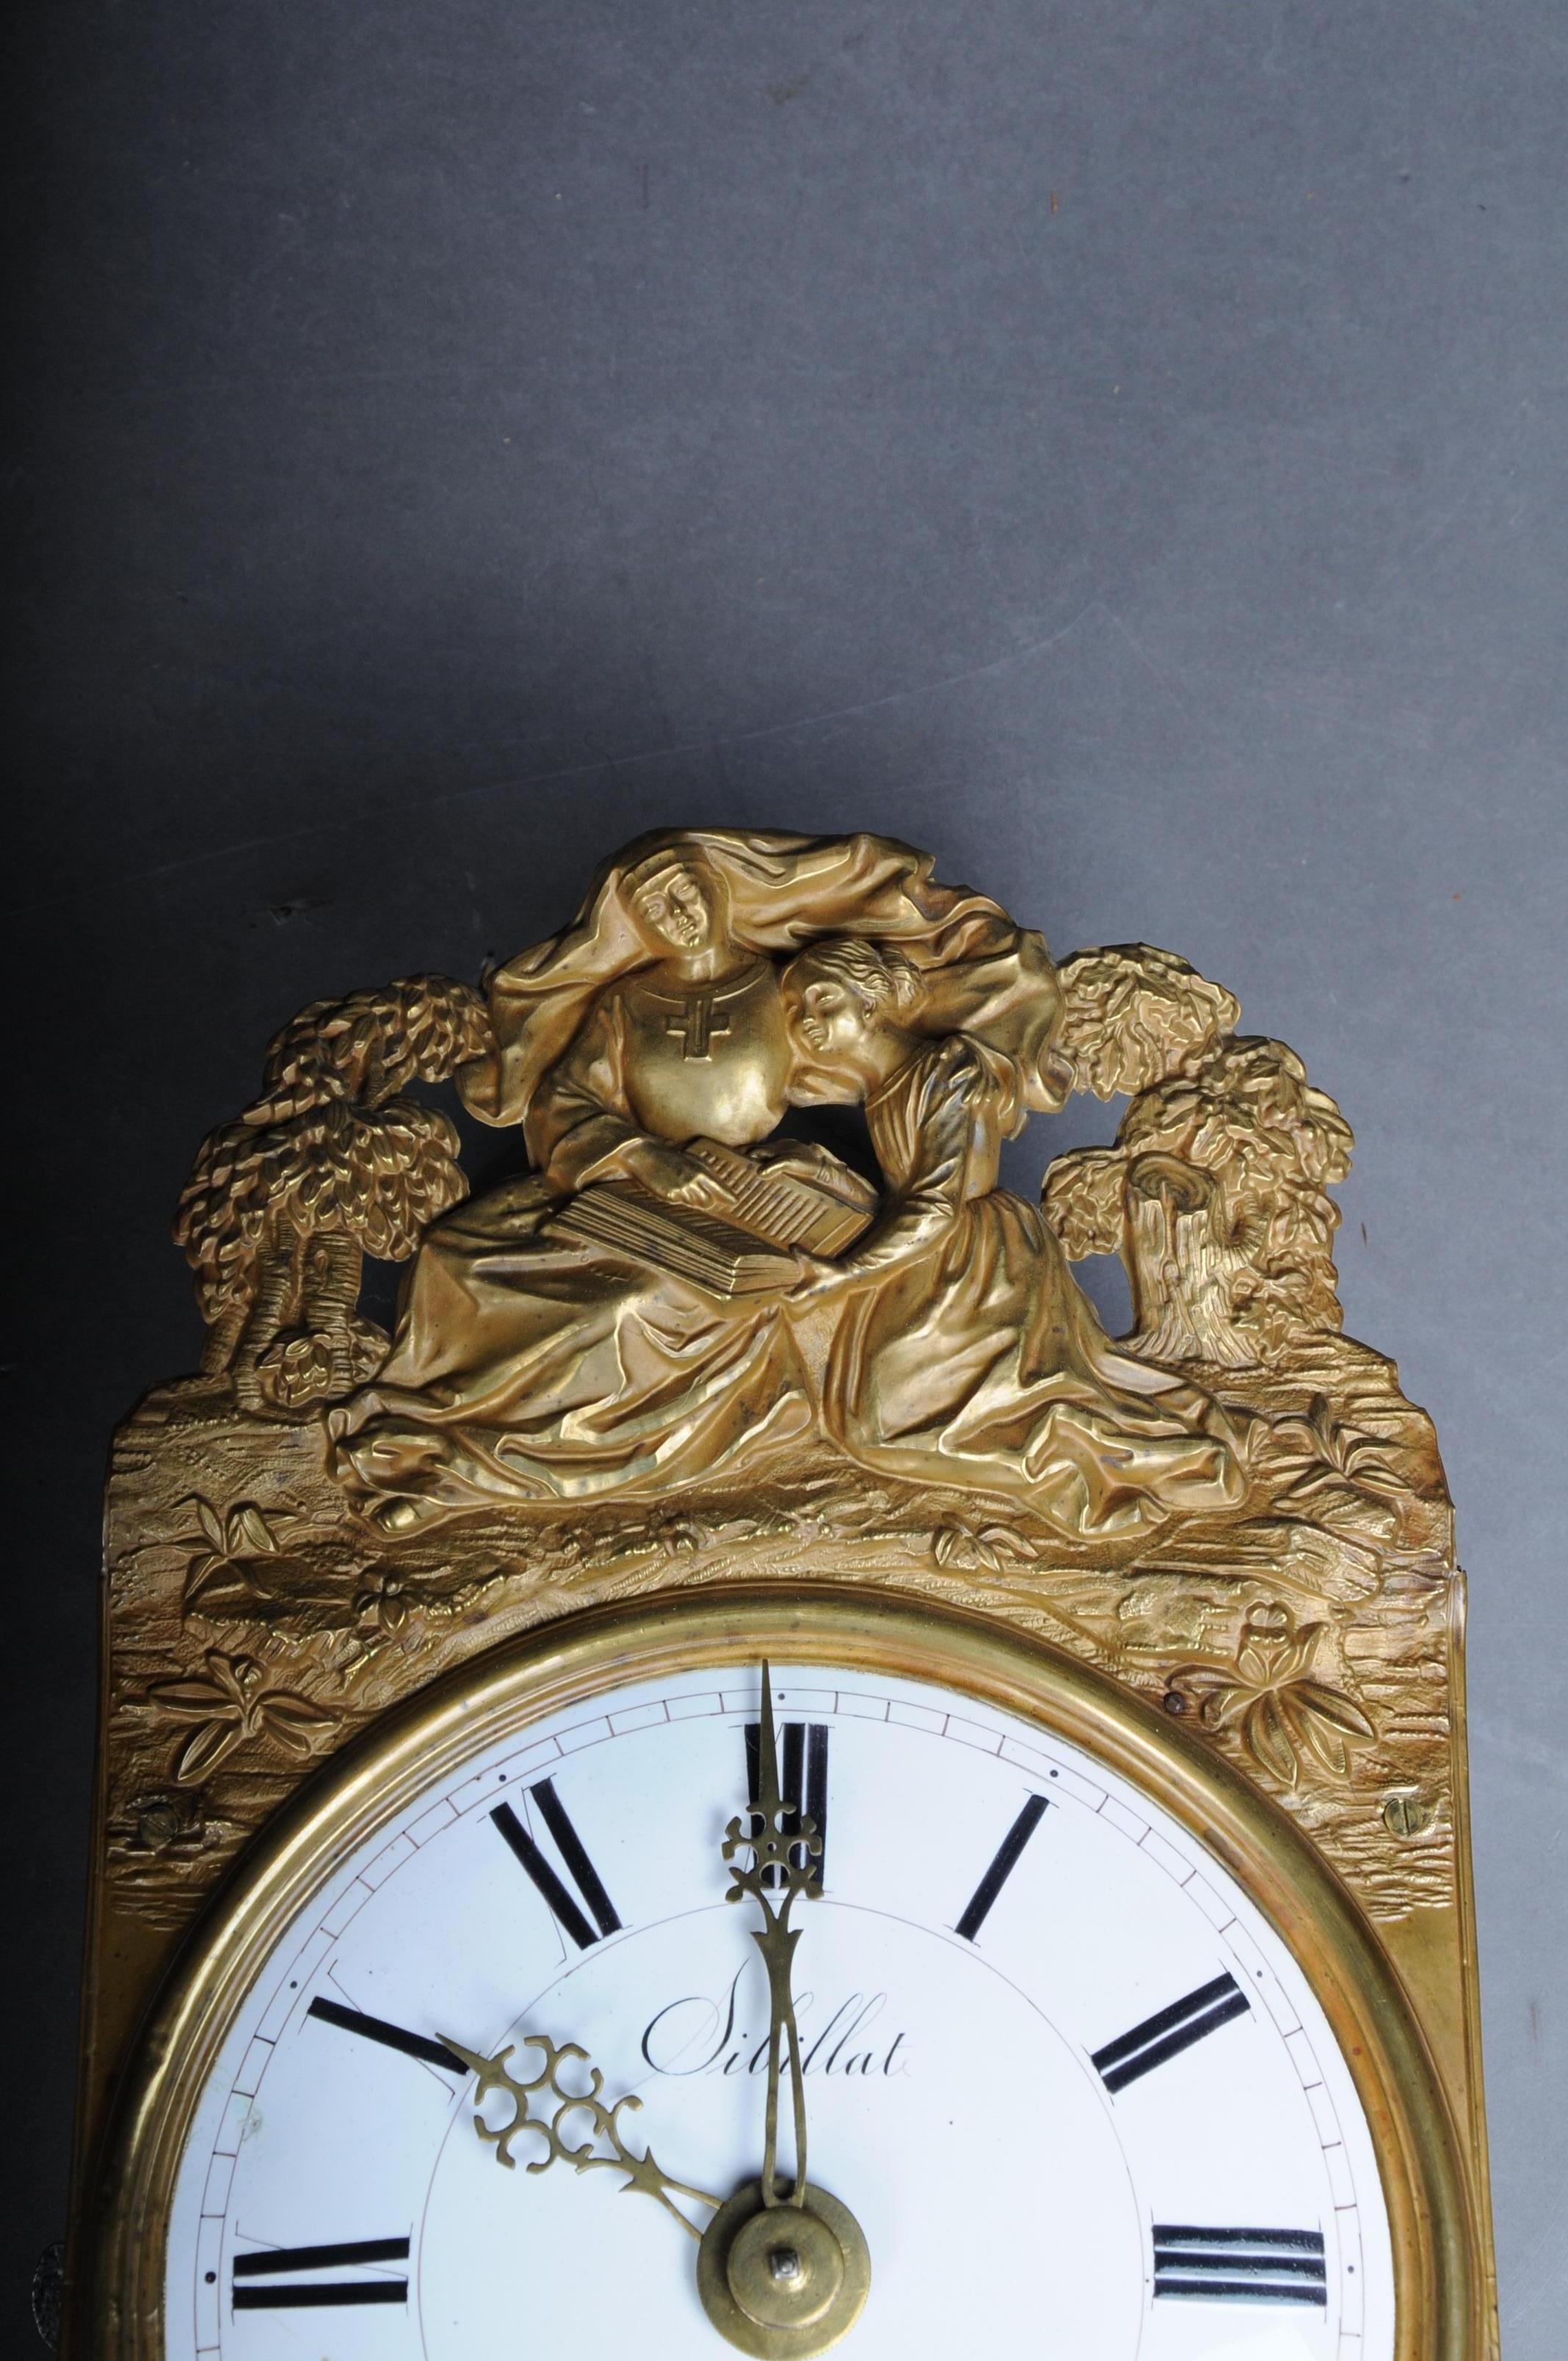 High quality originals Comtoise / wall clock brass

Heavy, high quality Comtoiser watch movement.
A beautiful antique original French wall clock (Comtoise).
Enamelled dial pendulum and 2 weights the border is made of stamped brass sheet is in